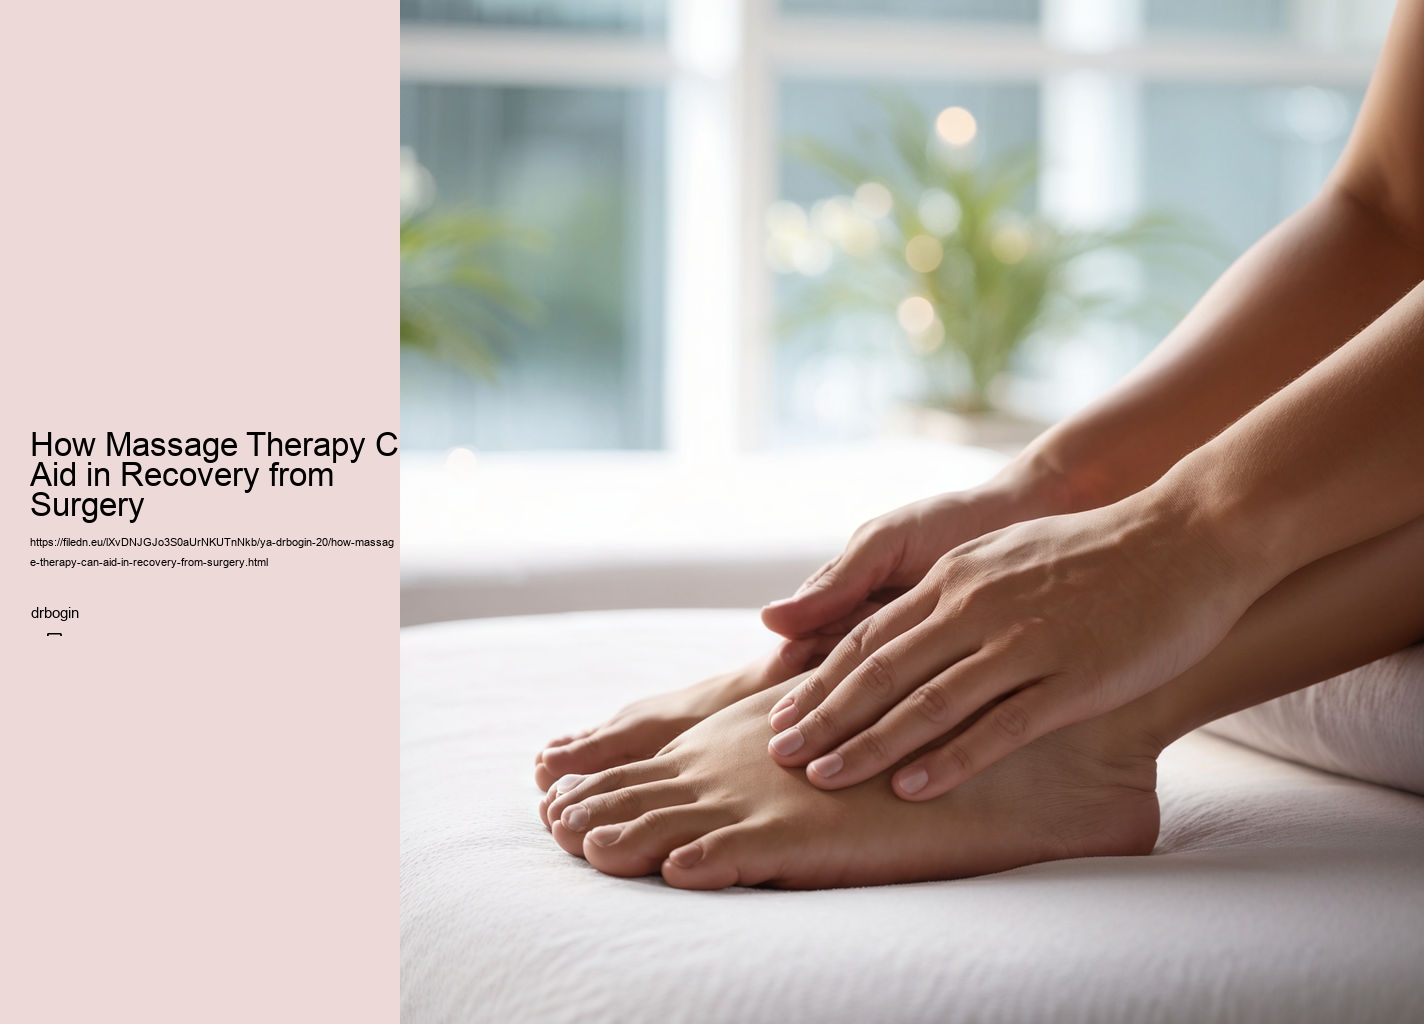 How Massage Therapy Can Aid in Recovery from Surgery